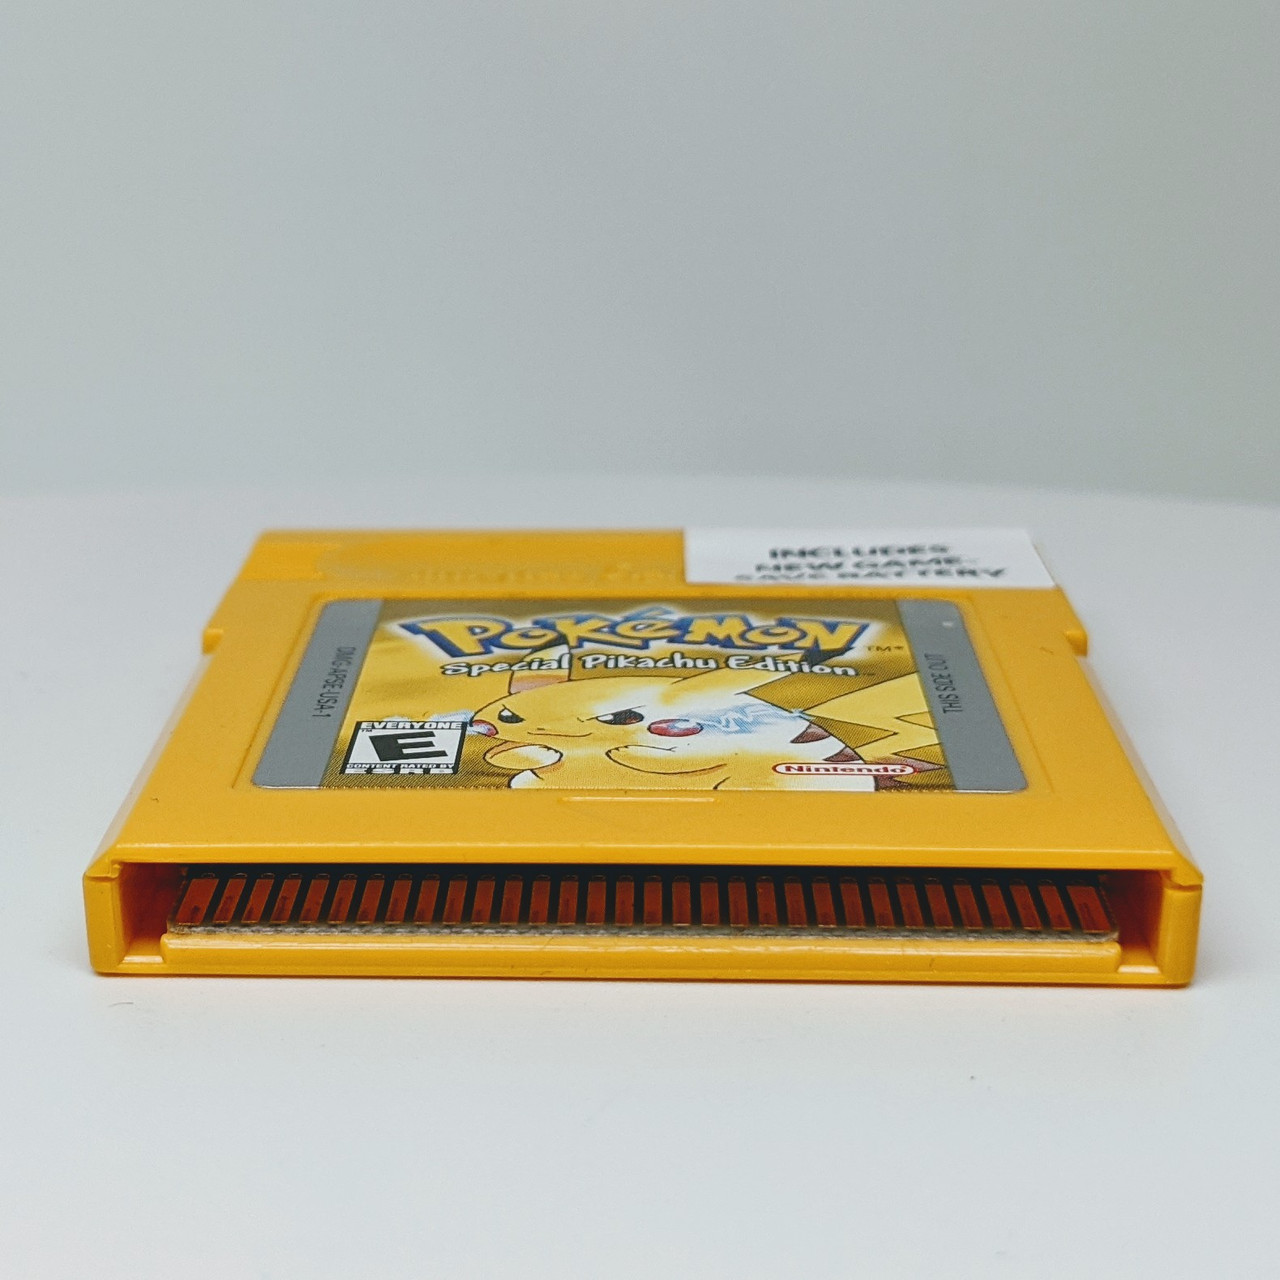 Pokémon Silver Yellow   - The Independent Video Game